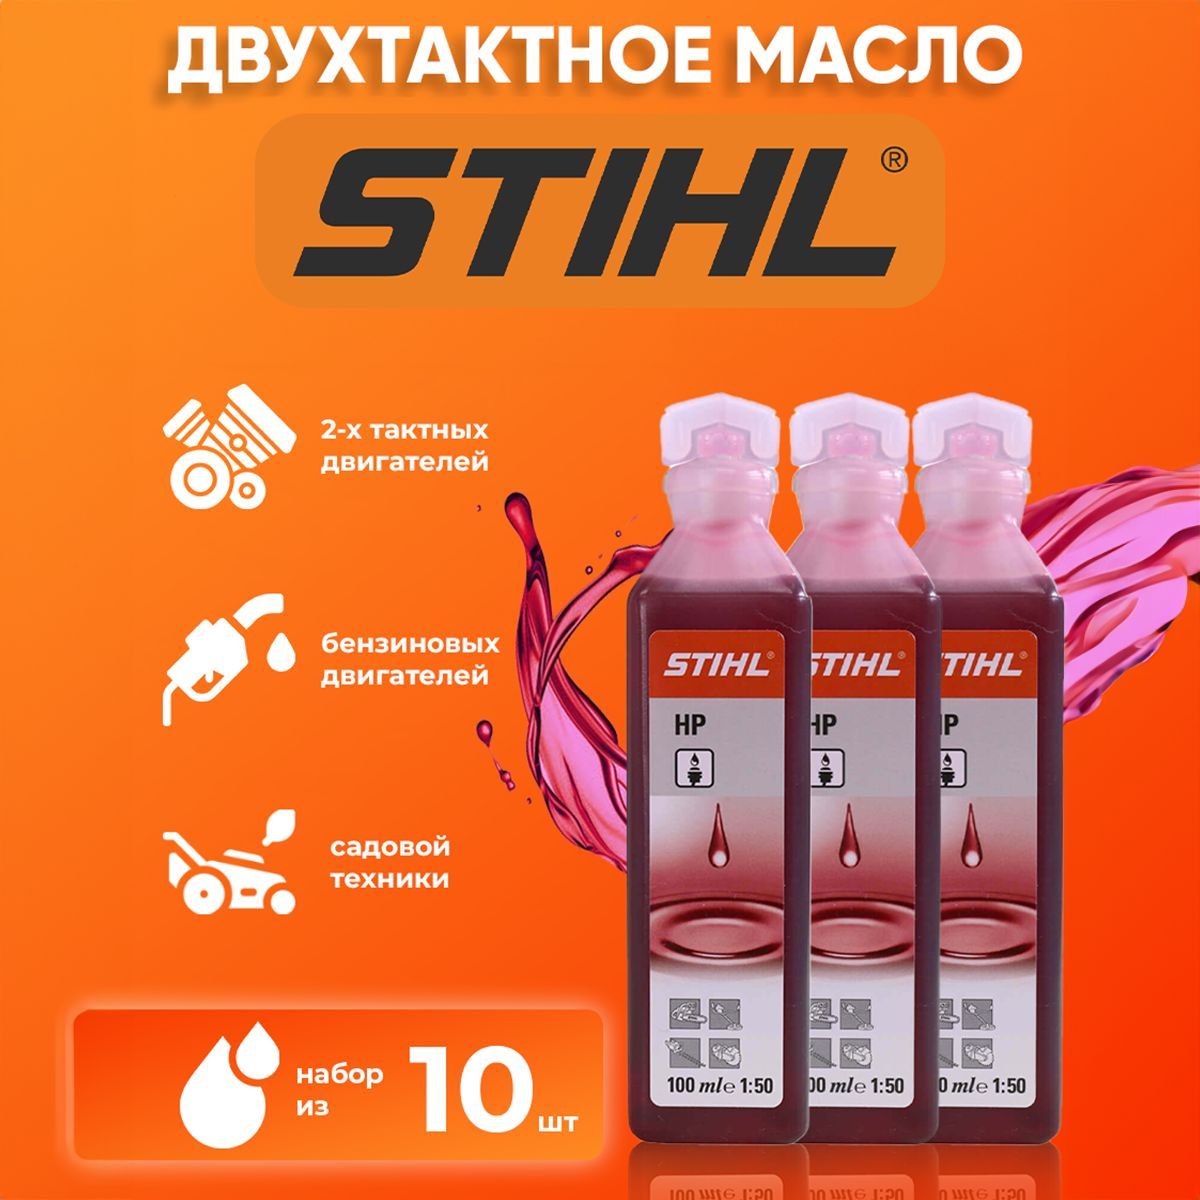 Масло Stihl 100 мл. Масло двухтактное Stihl 100 мл. Масло моторное Country Country St-507 2т Stihl минеральное 1 л 55324. Масло моторное штиль